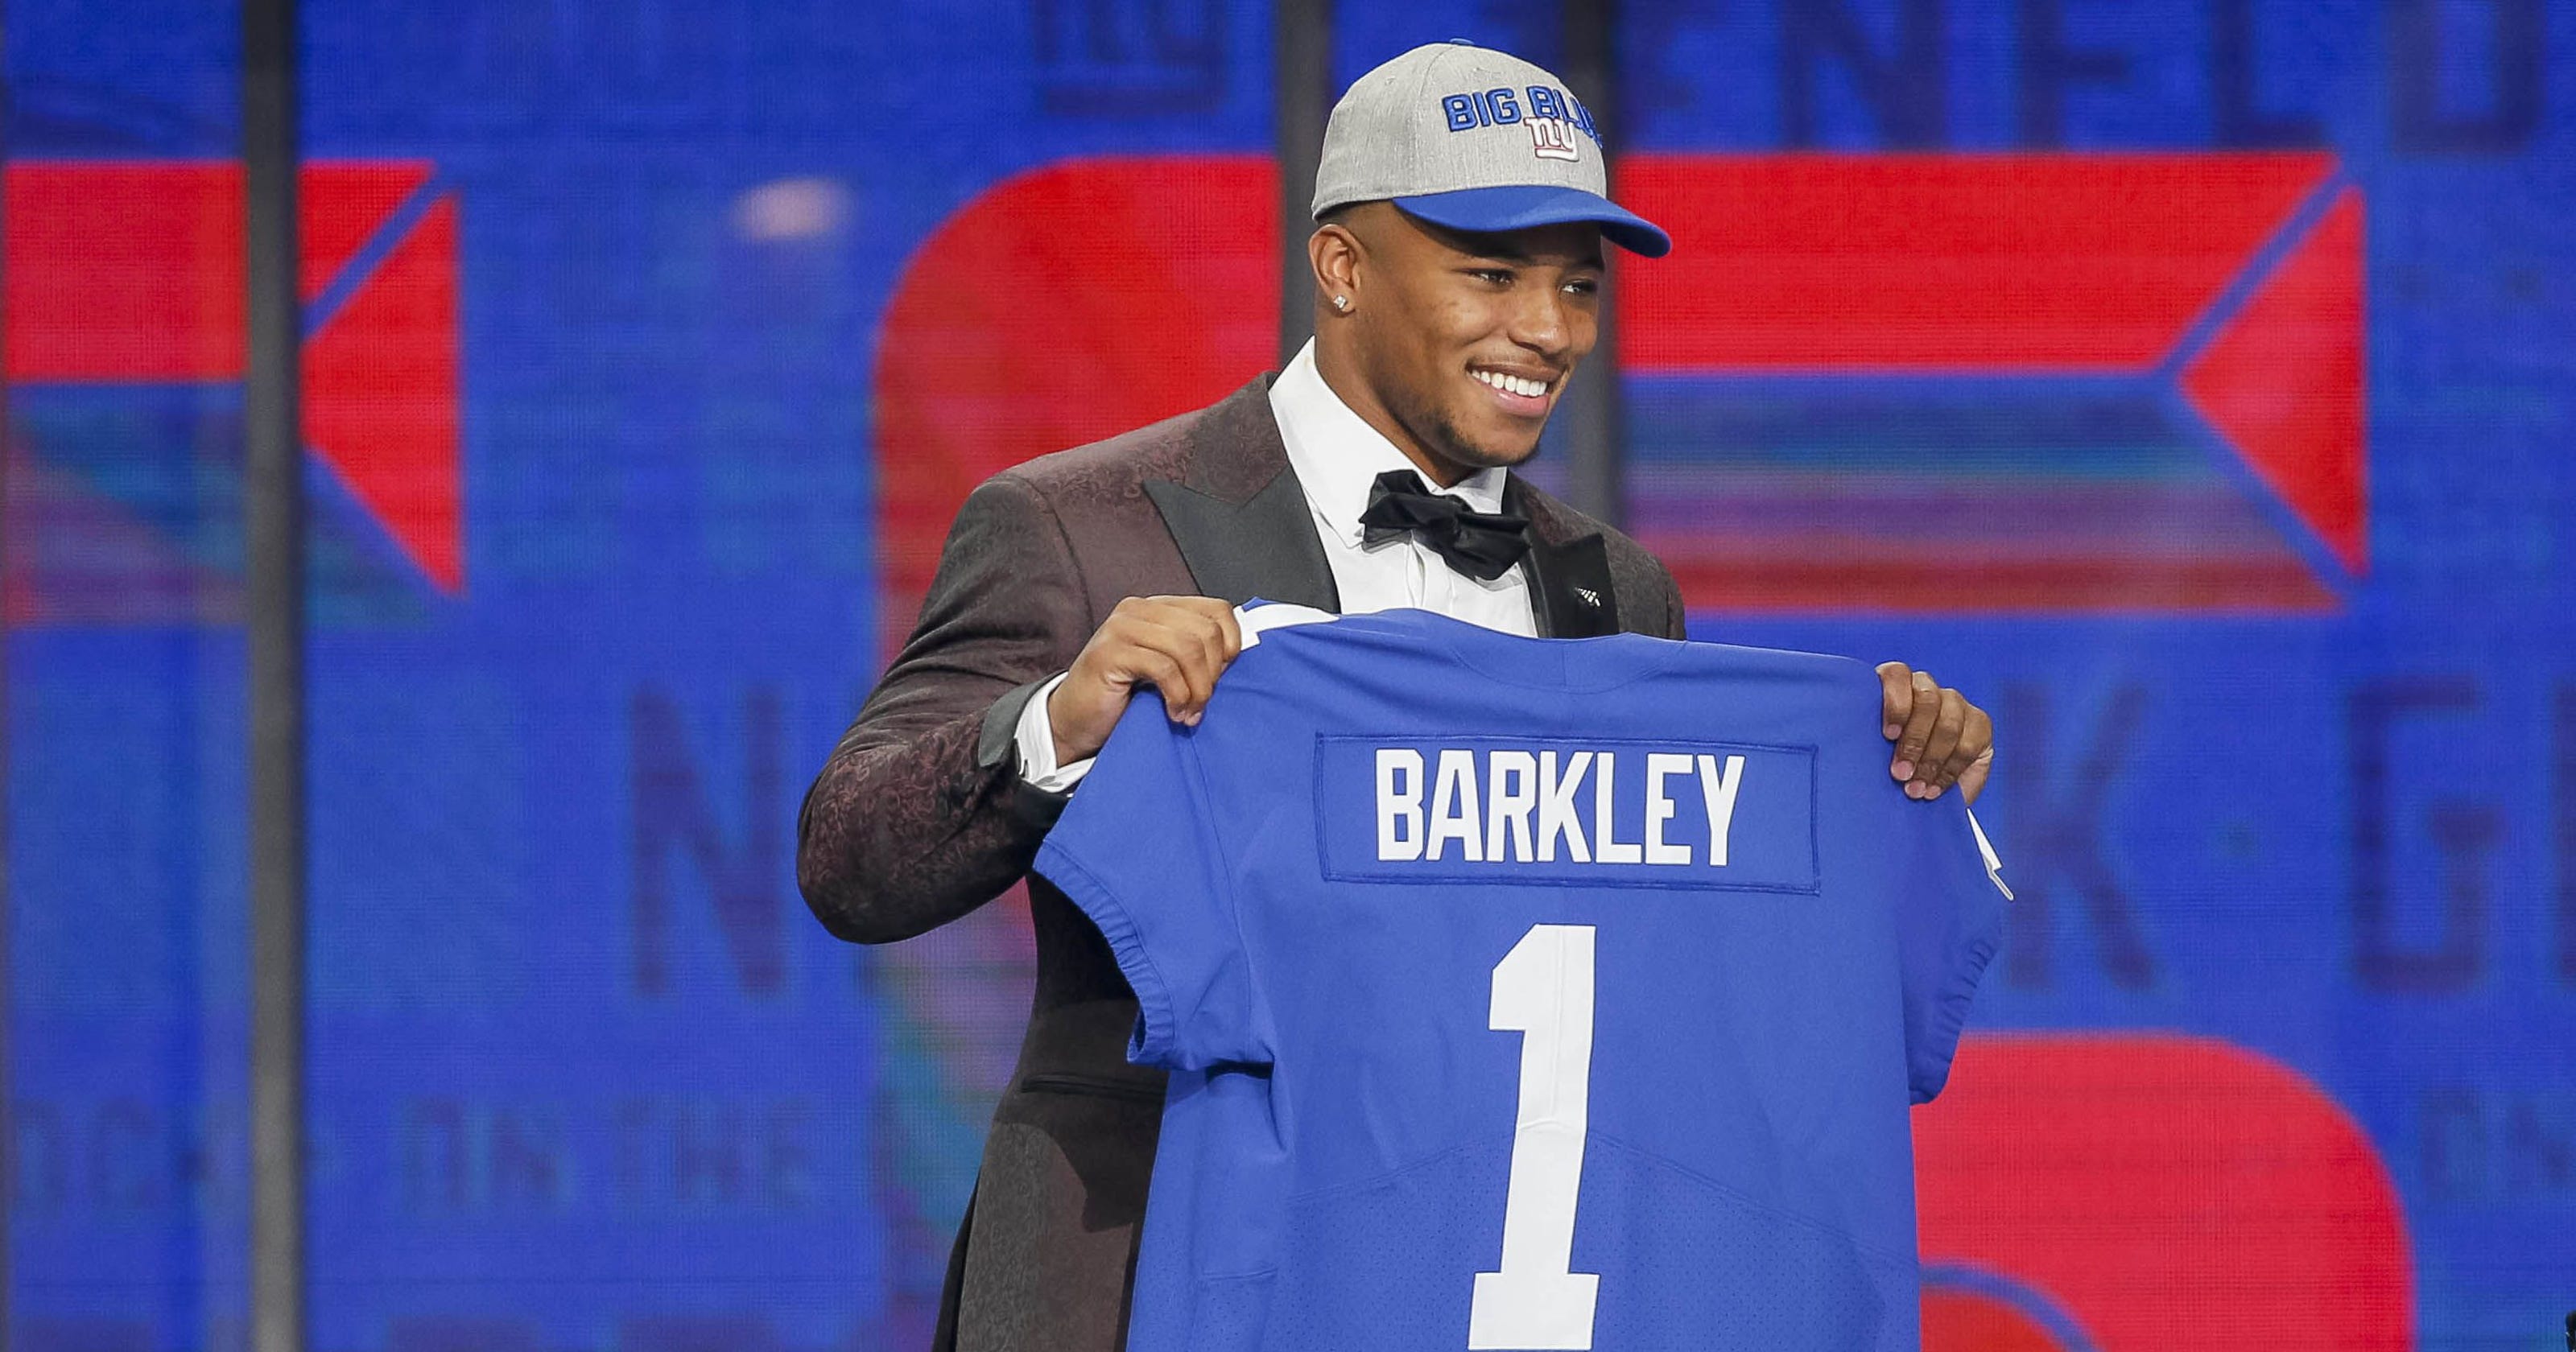 NFL draft 2018: Giants' Saquon Barkley pick shows they're in win-now mode3200 x 1680